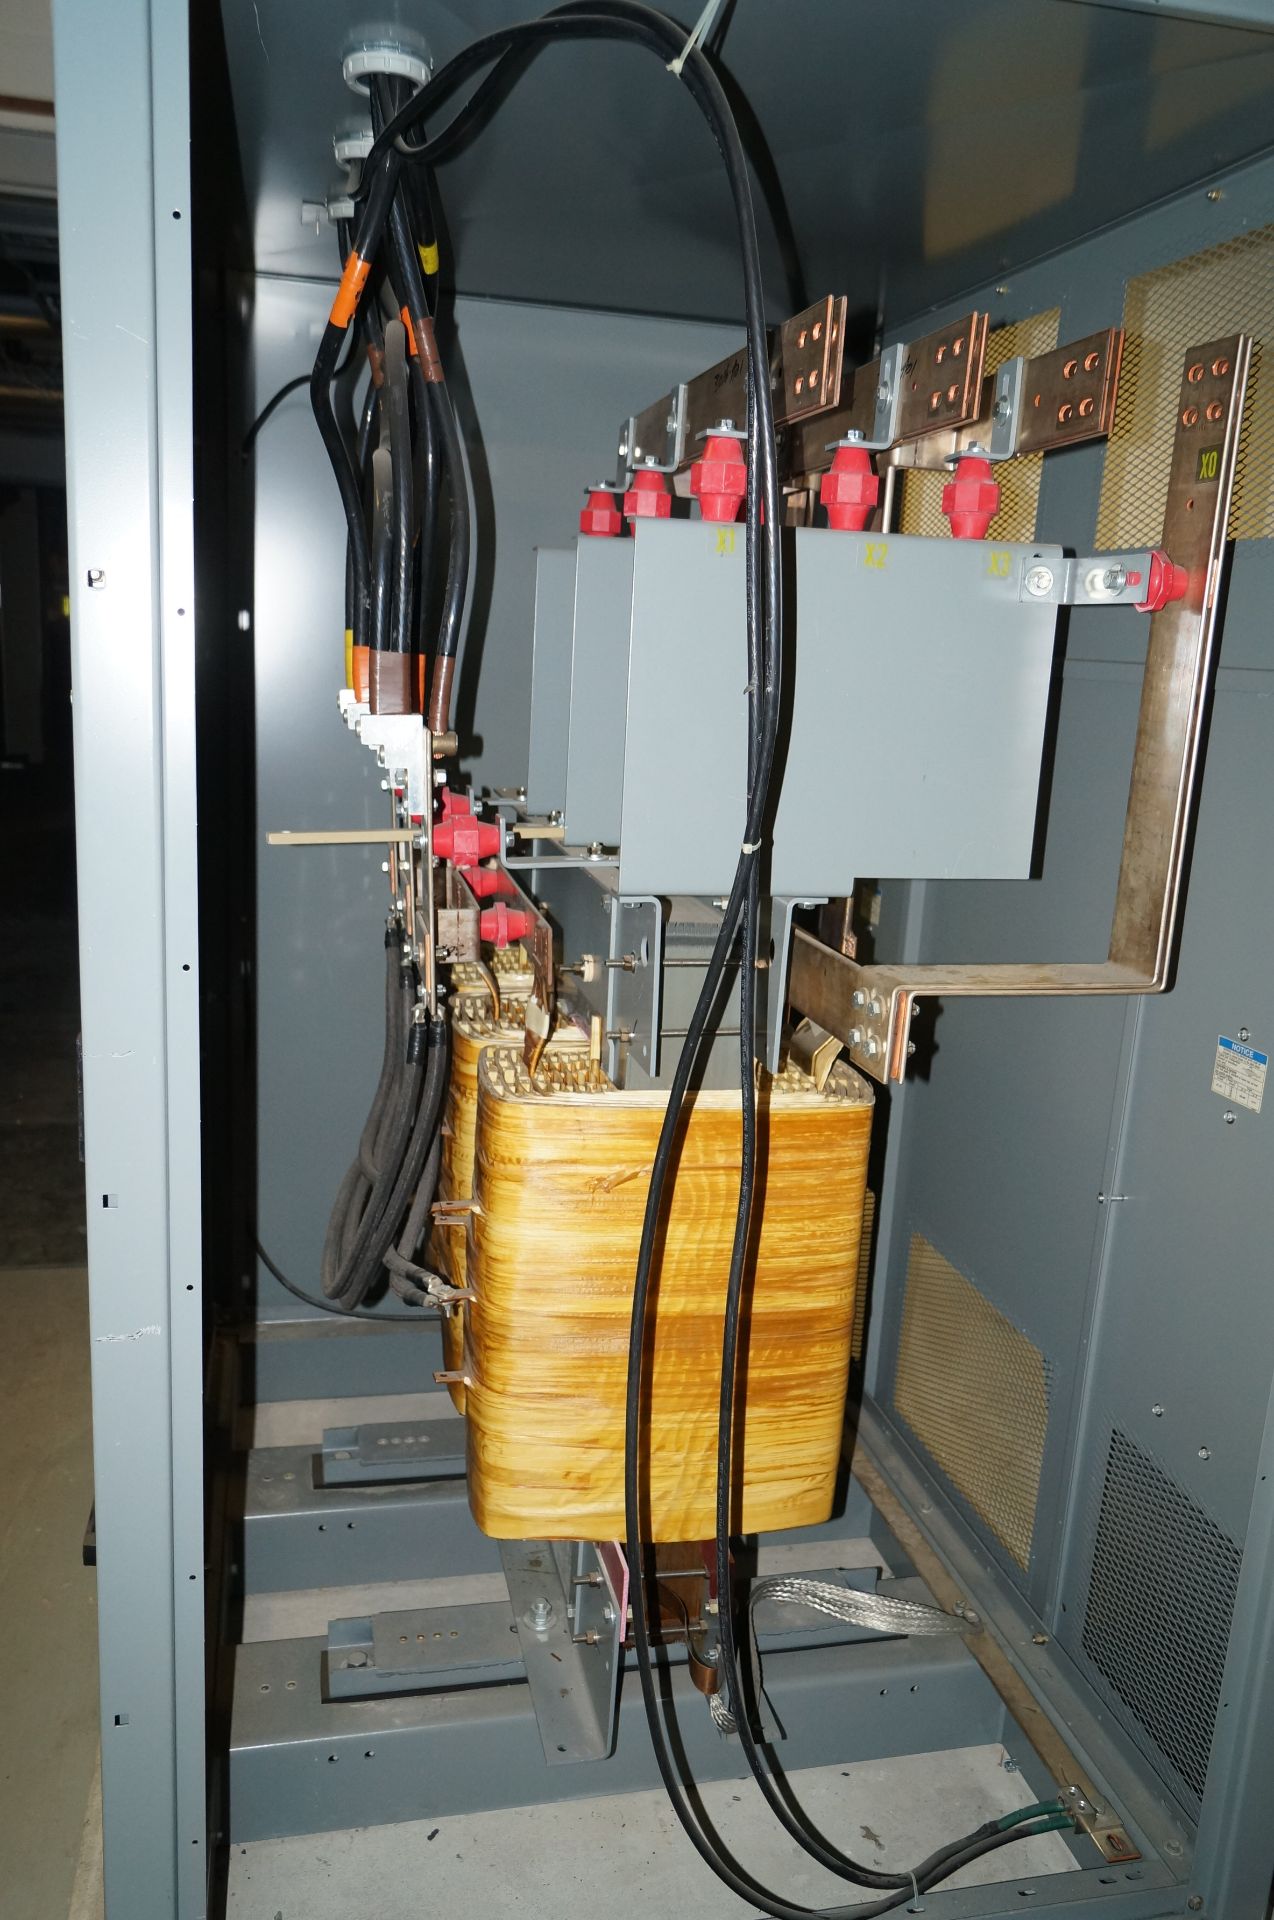 750 KVA SQUARE D SORGEL, 3 PHASE INSULATED TRANSFORMER, CLASS AA-FFA, WT 4800LBS, HZ 60, TYPE SO, - Image 2 of 4